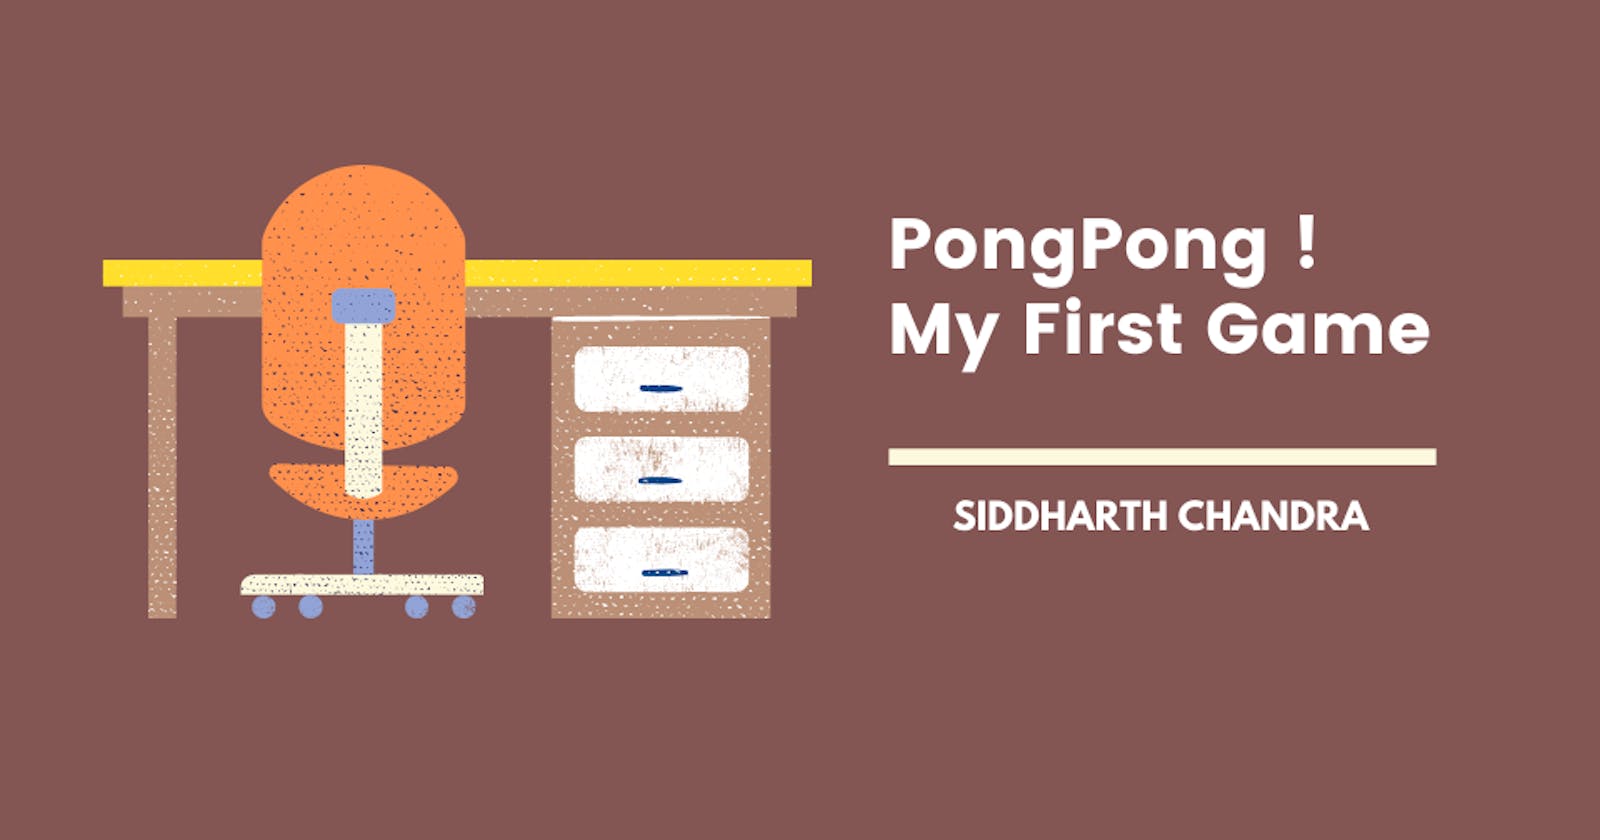 PongPong ! My First Game